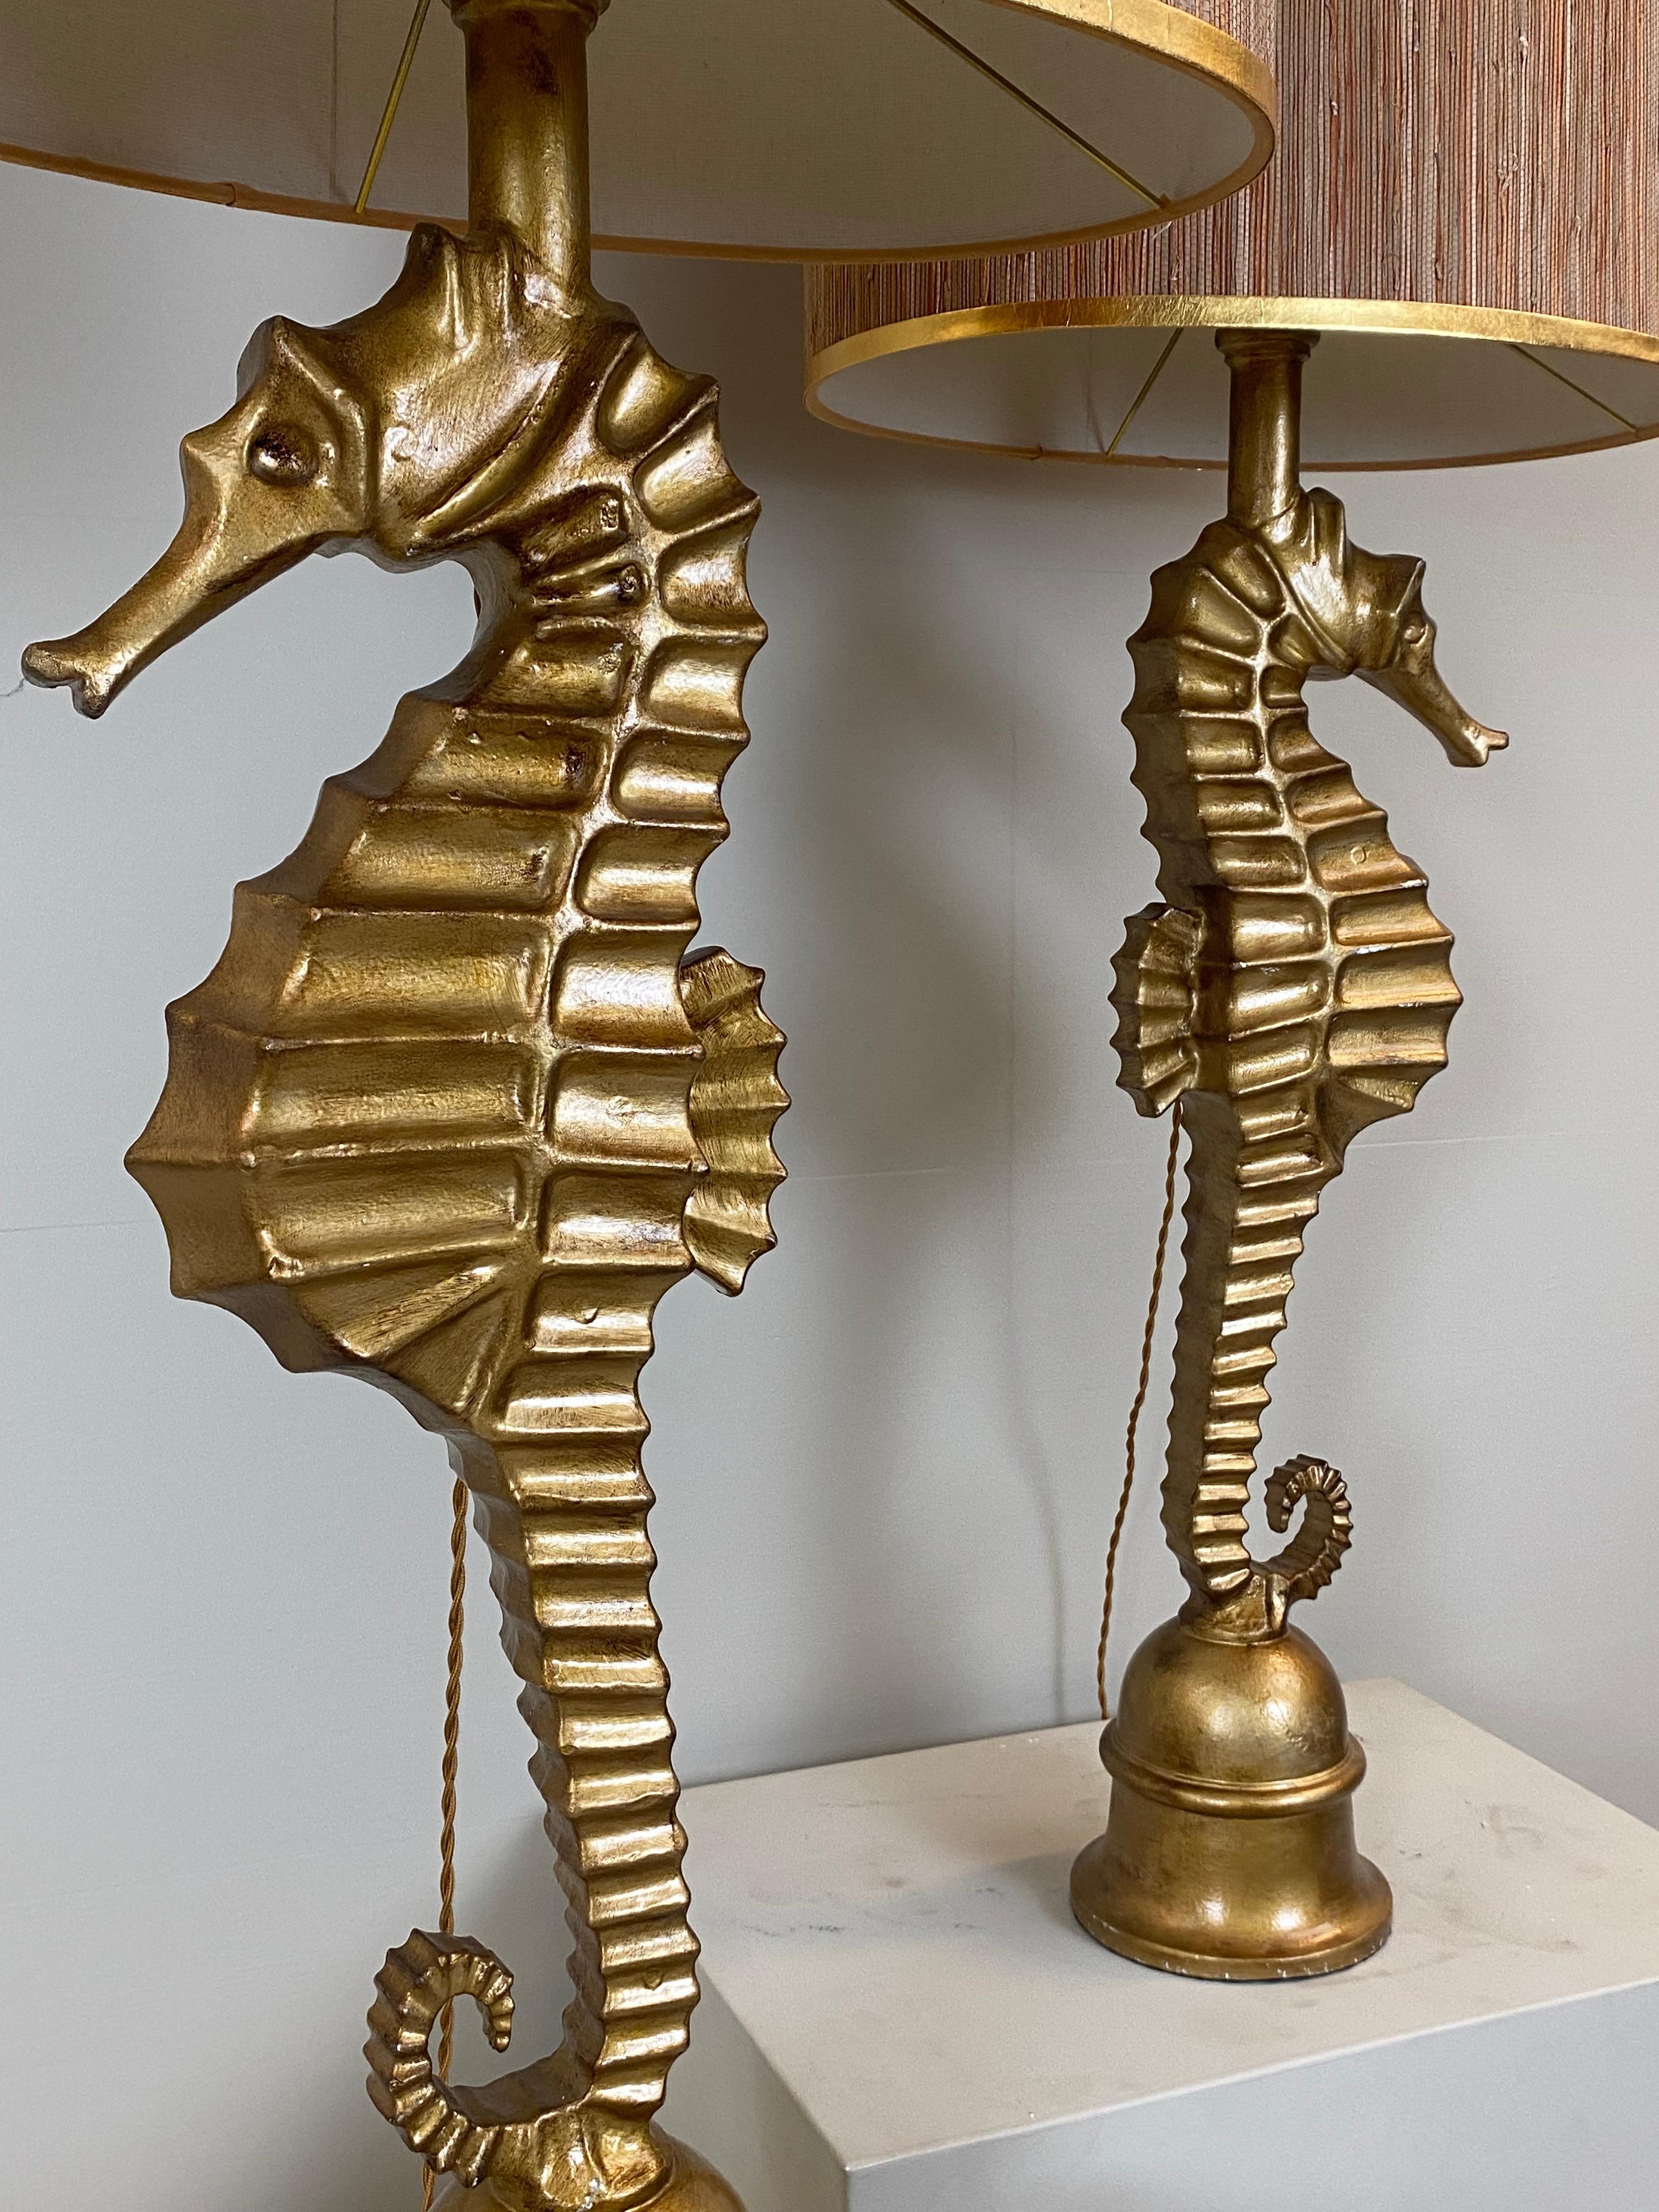 Polished Pair of Art Deco style vintage metallic seahorse table lamps. France, 1970s.